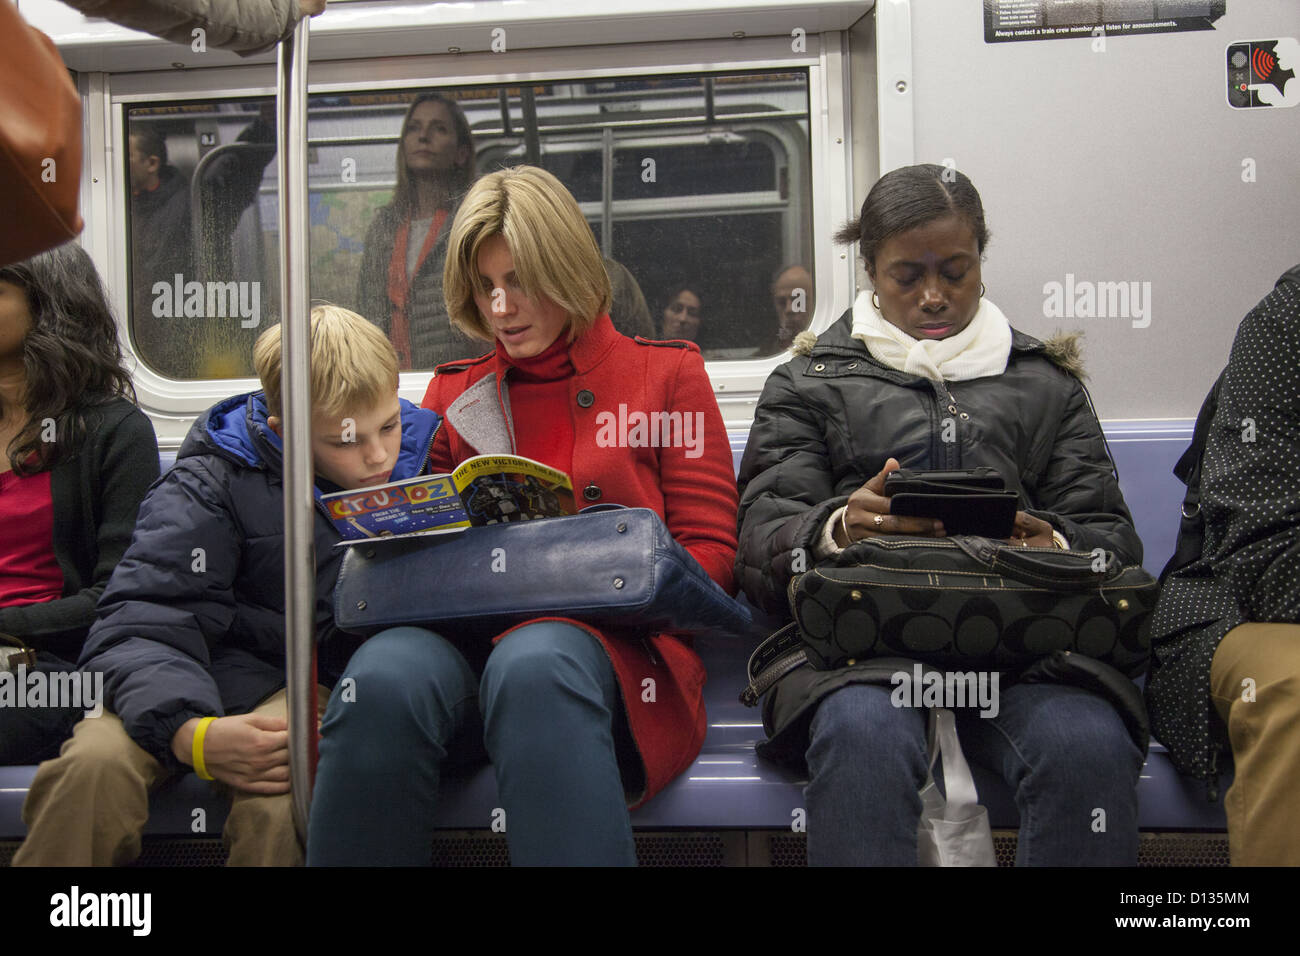 Mother And Son Involve In A Common Interest While Riding The Subway In Manhattan Nyc Stock 